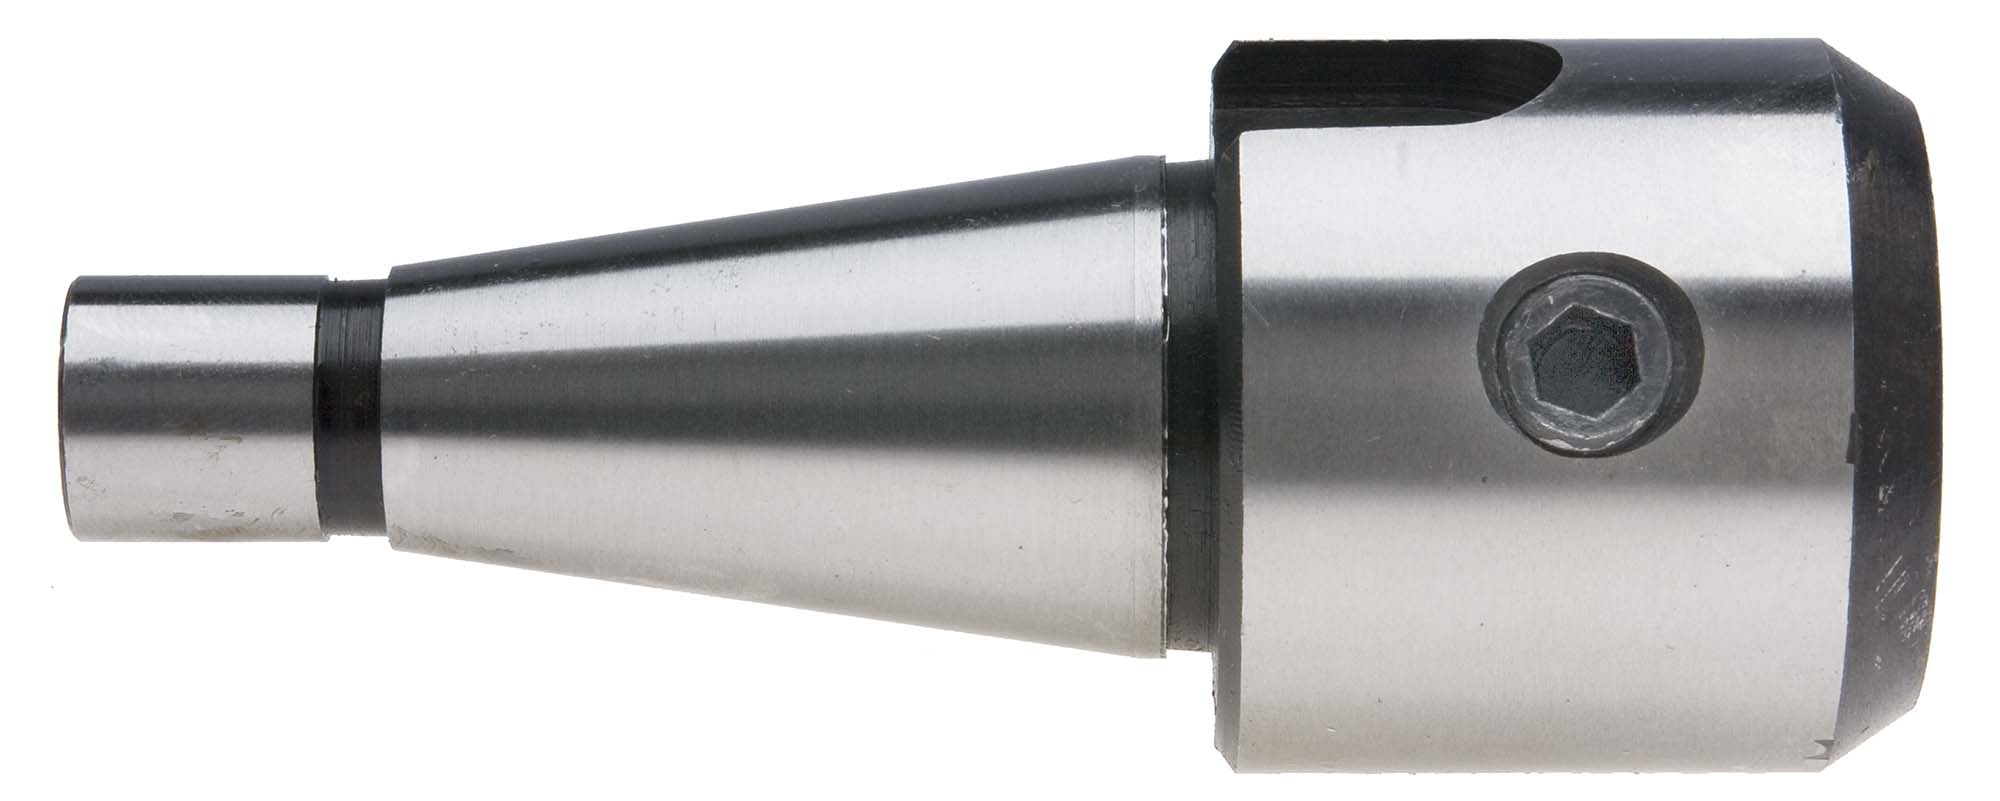 # 40 NST - 7/8 End Mill Adapter